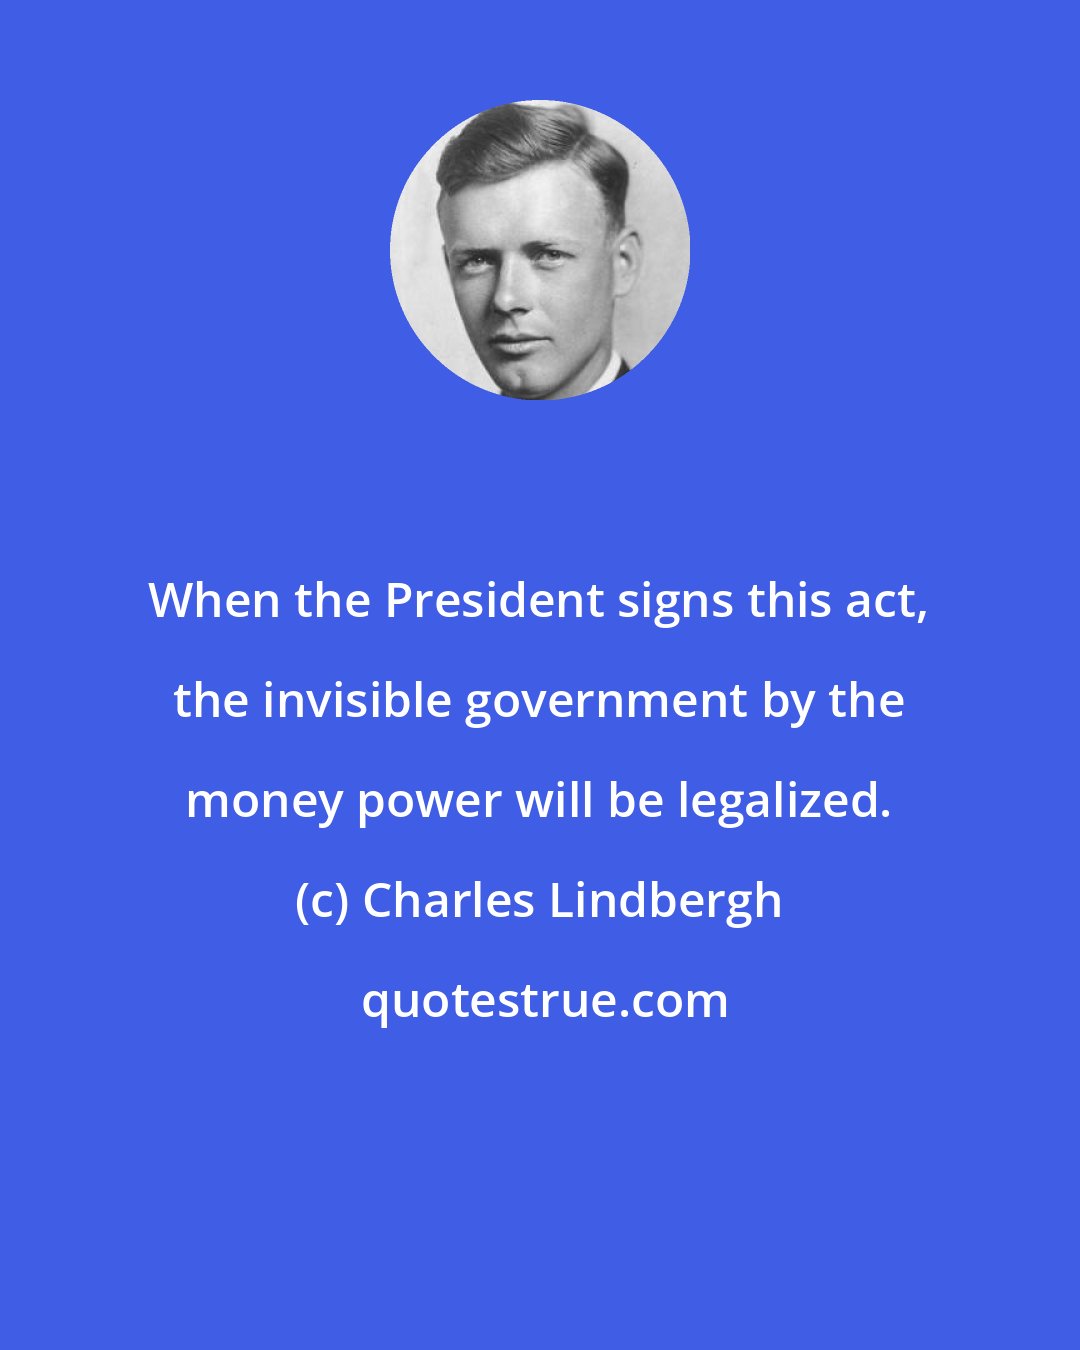 Charles Lindbergh: When the President signs this act, the invisible government by the money power will be legalized.